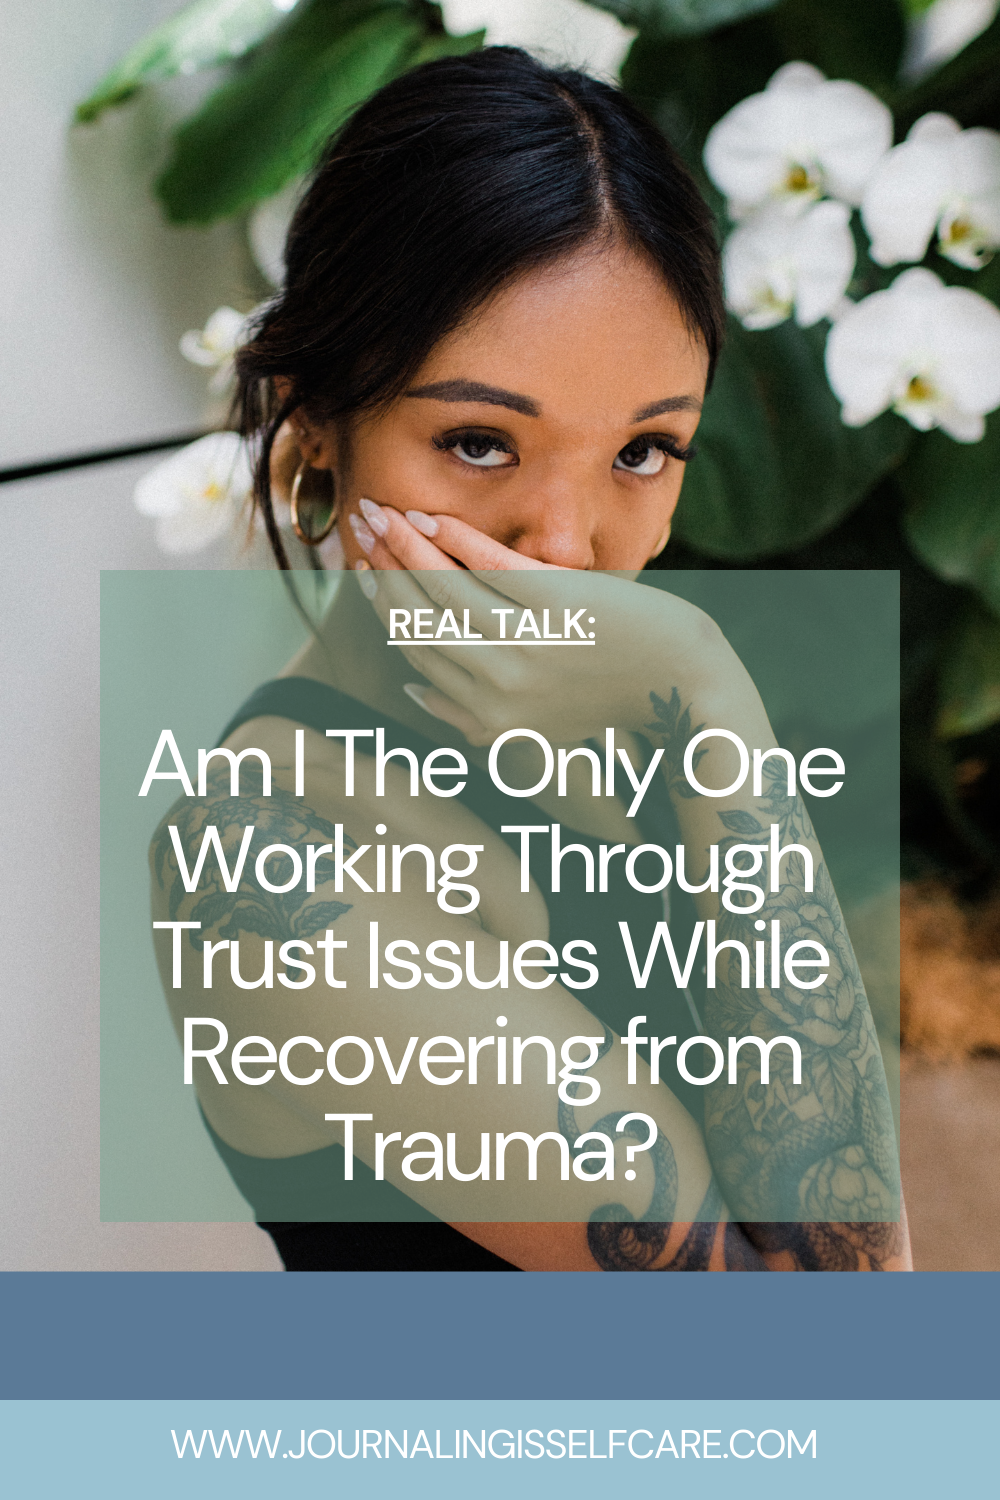 Real Talk: Am I The Only One Working Through Trust Issues While Recovering from Trauma?